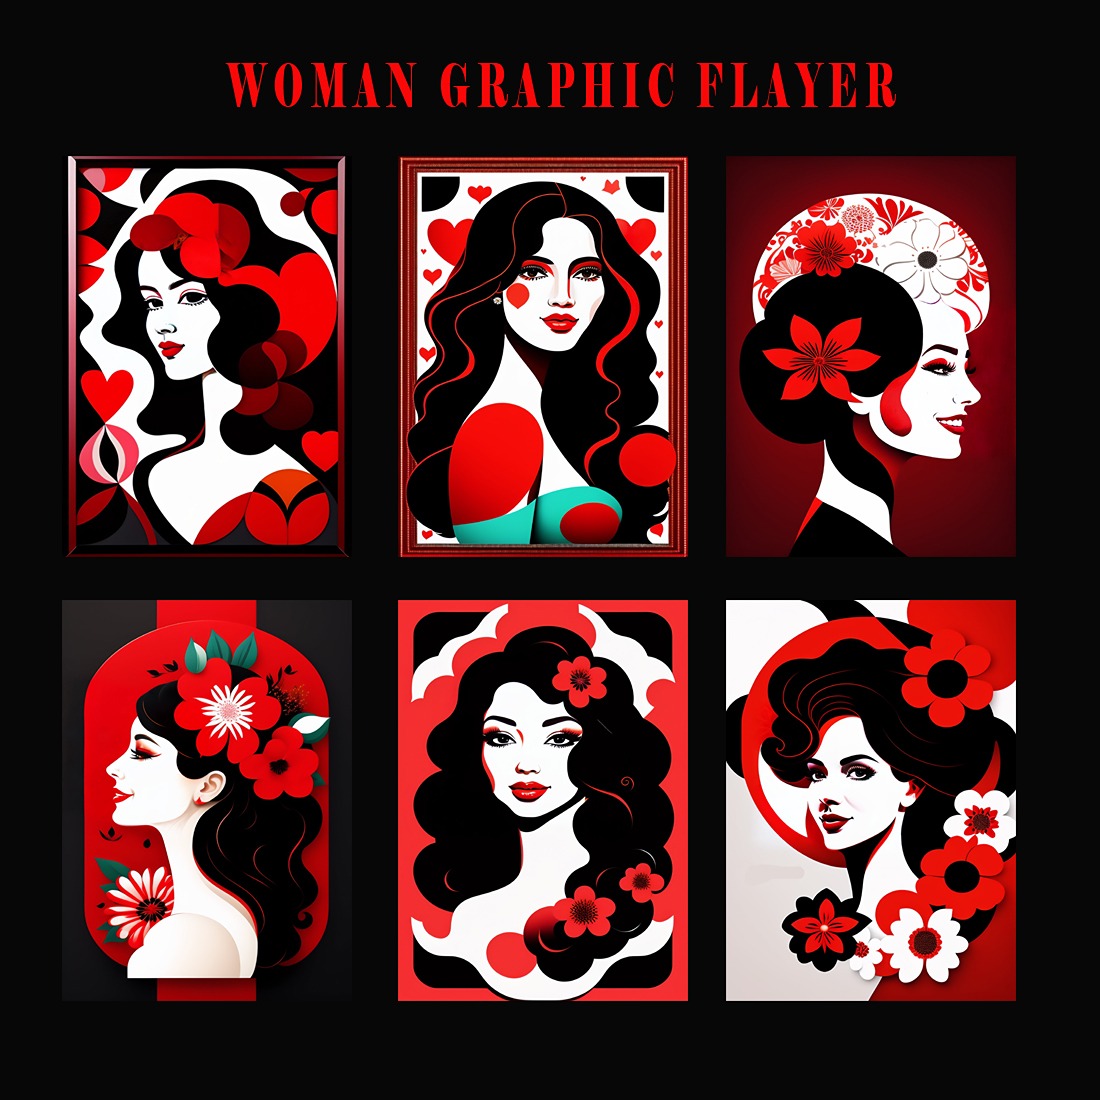 Woman - Graphic Flayer, woman day flayer, woman beauty graphic, woman graphic preview image.